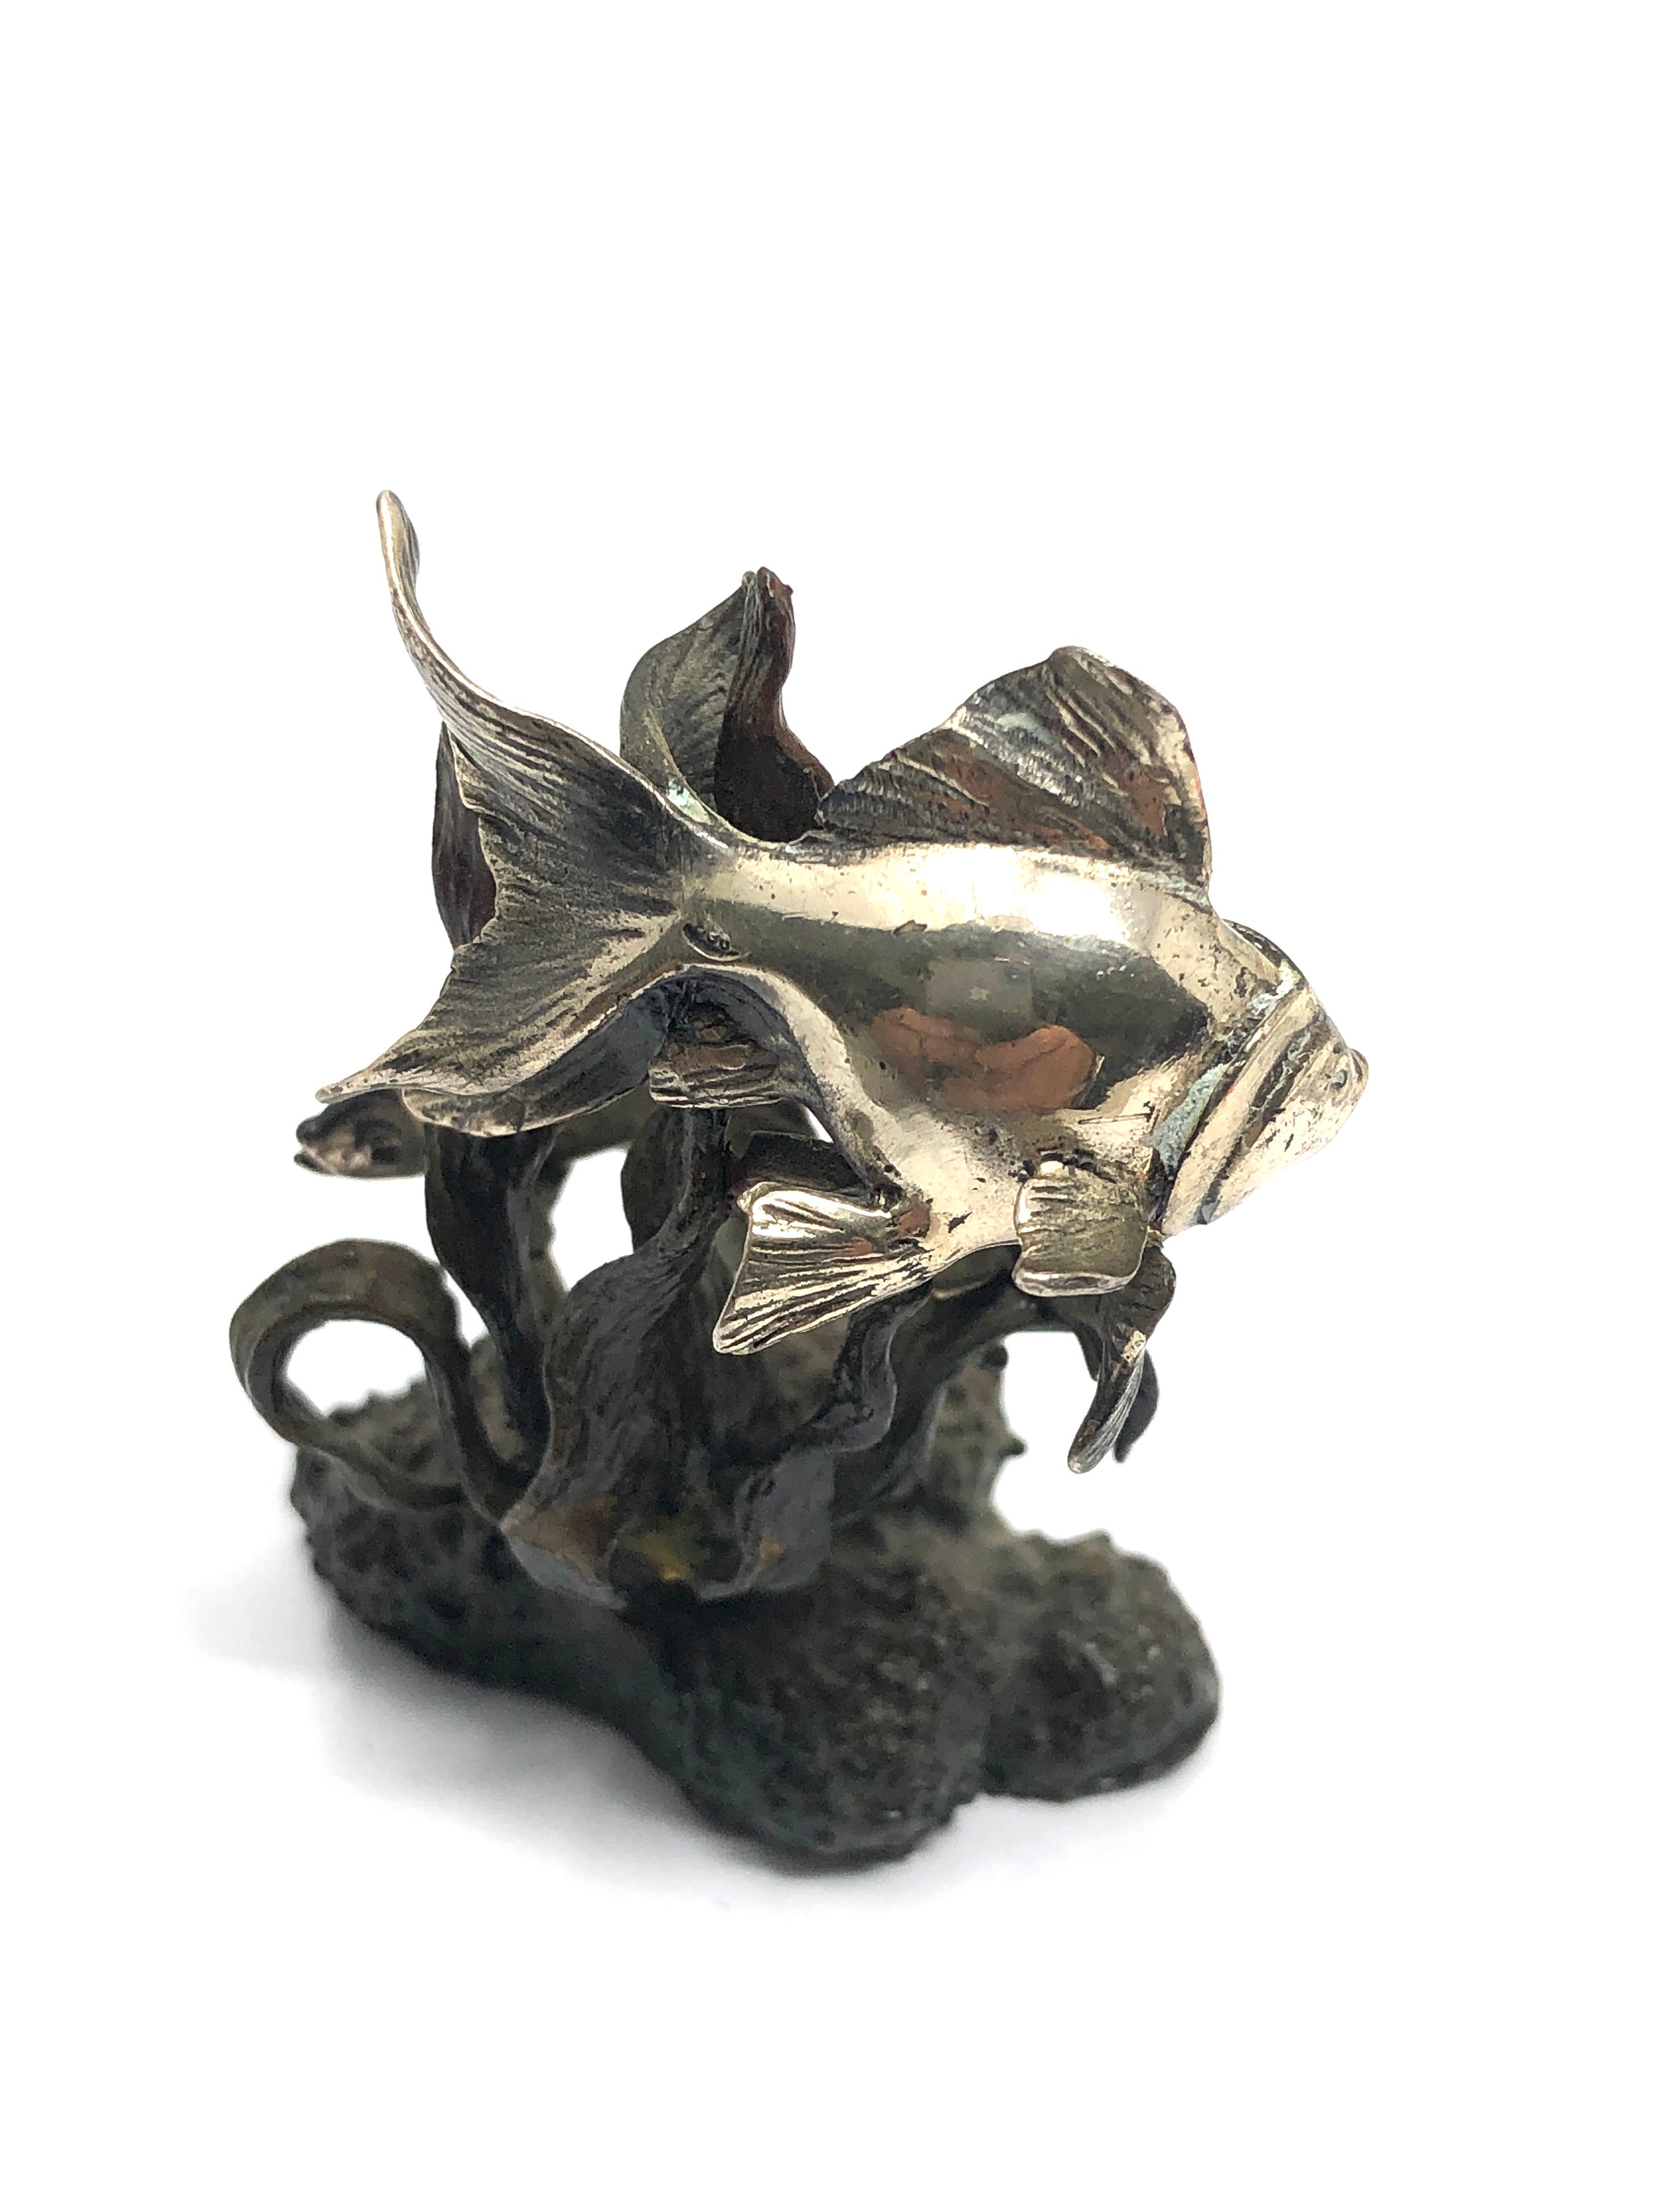 Silver & enamel painted miniature fish figure group measures approx 6.5cm tall hallmarked 800 weight - Image 3 of 5